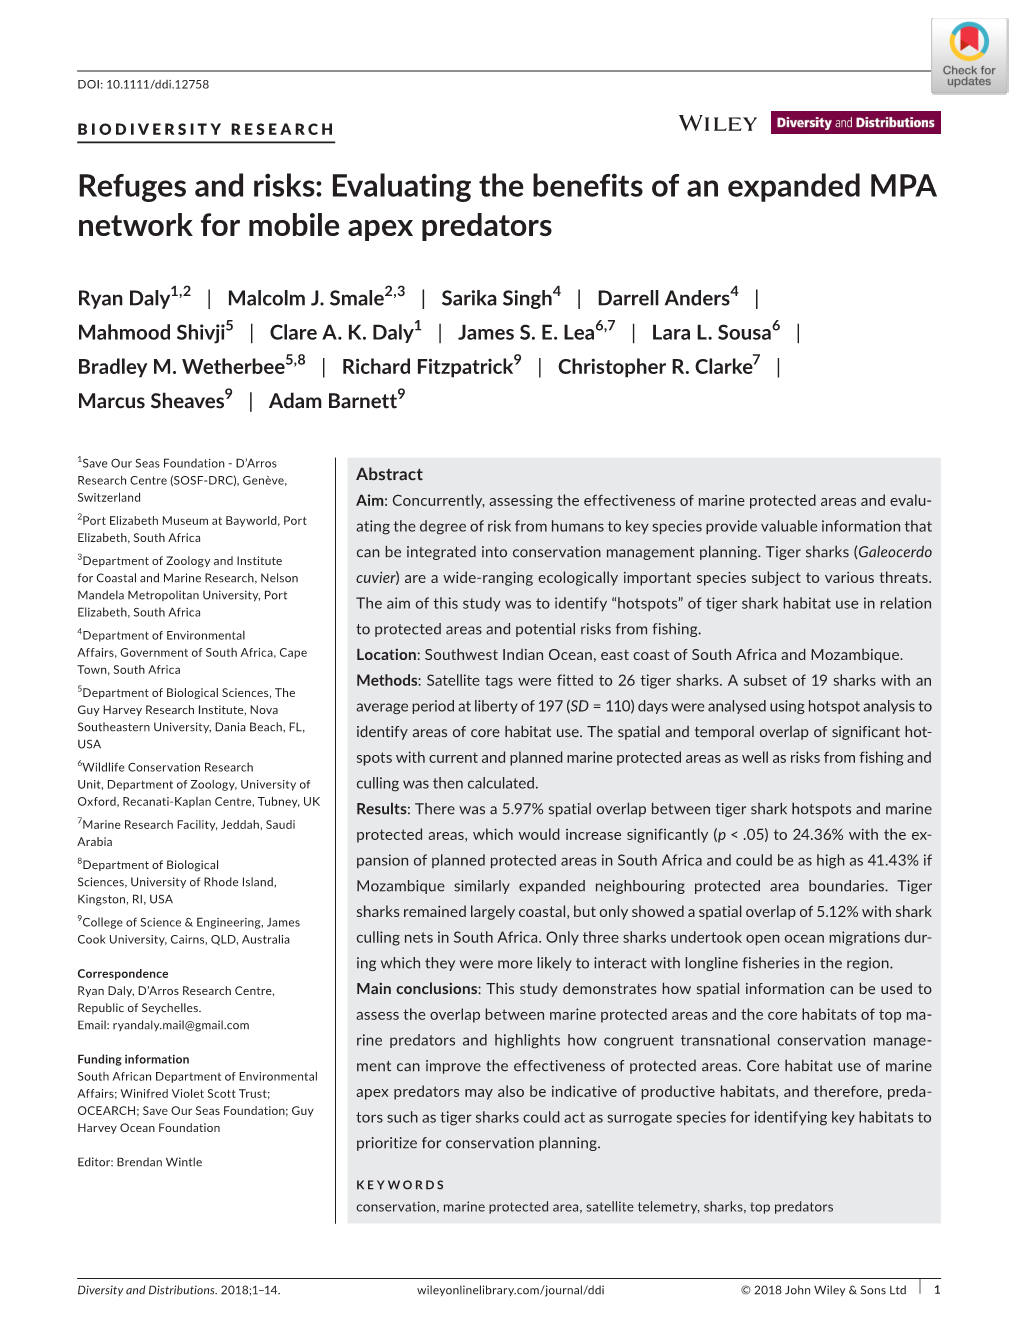 Refuges and Risks: Evaluating the Benefits of an Expanded MPA Network for Mobile Apex Predators